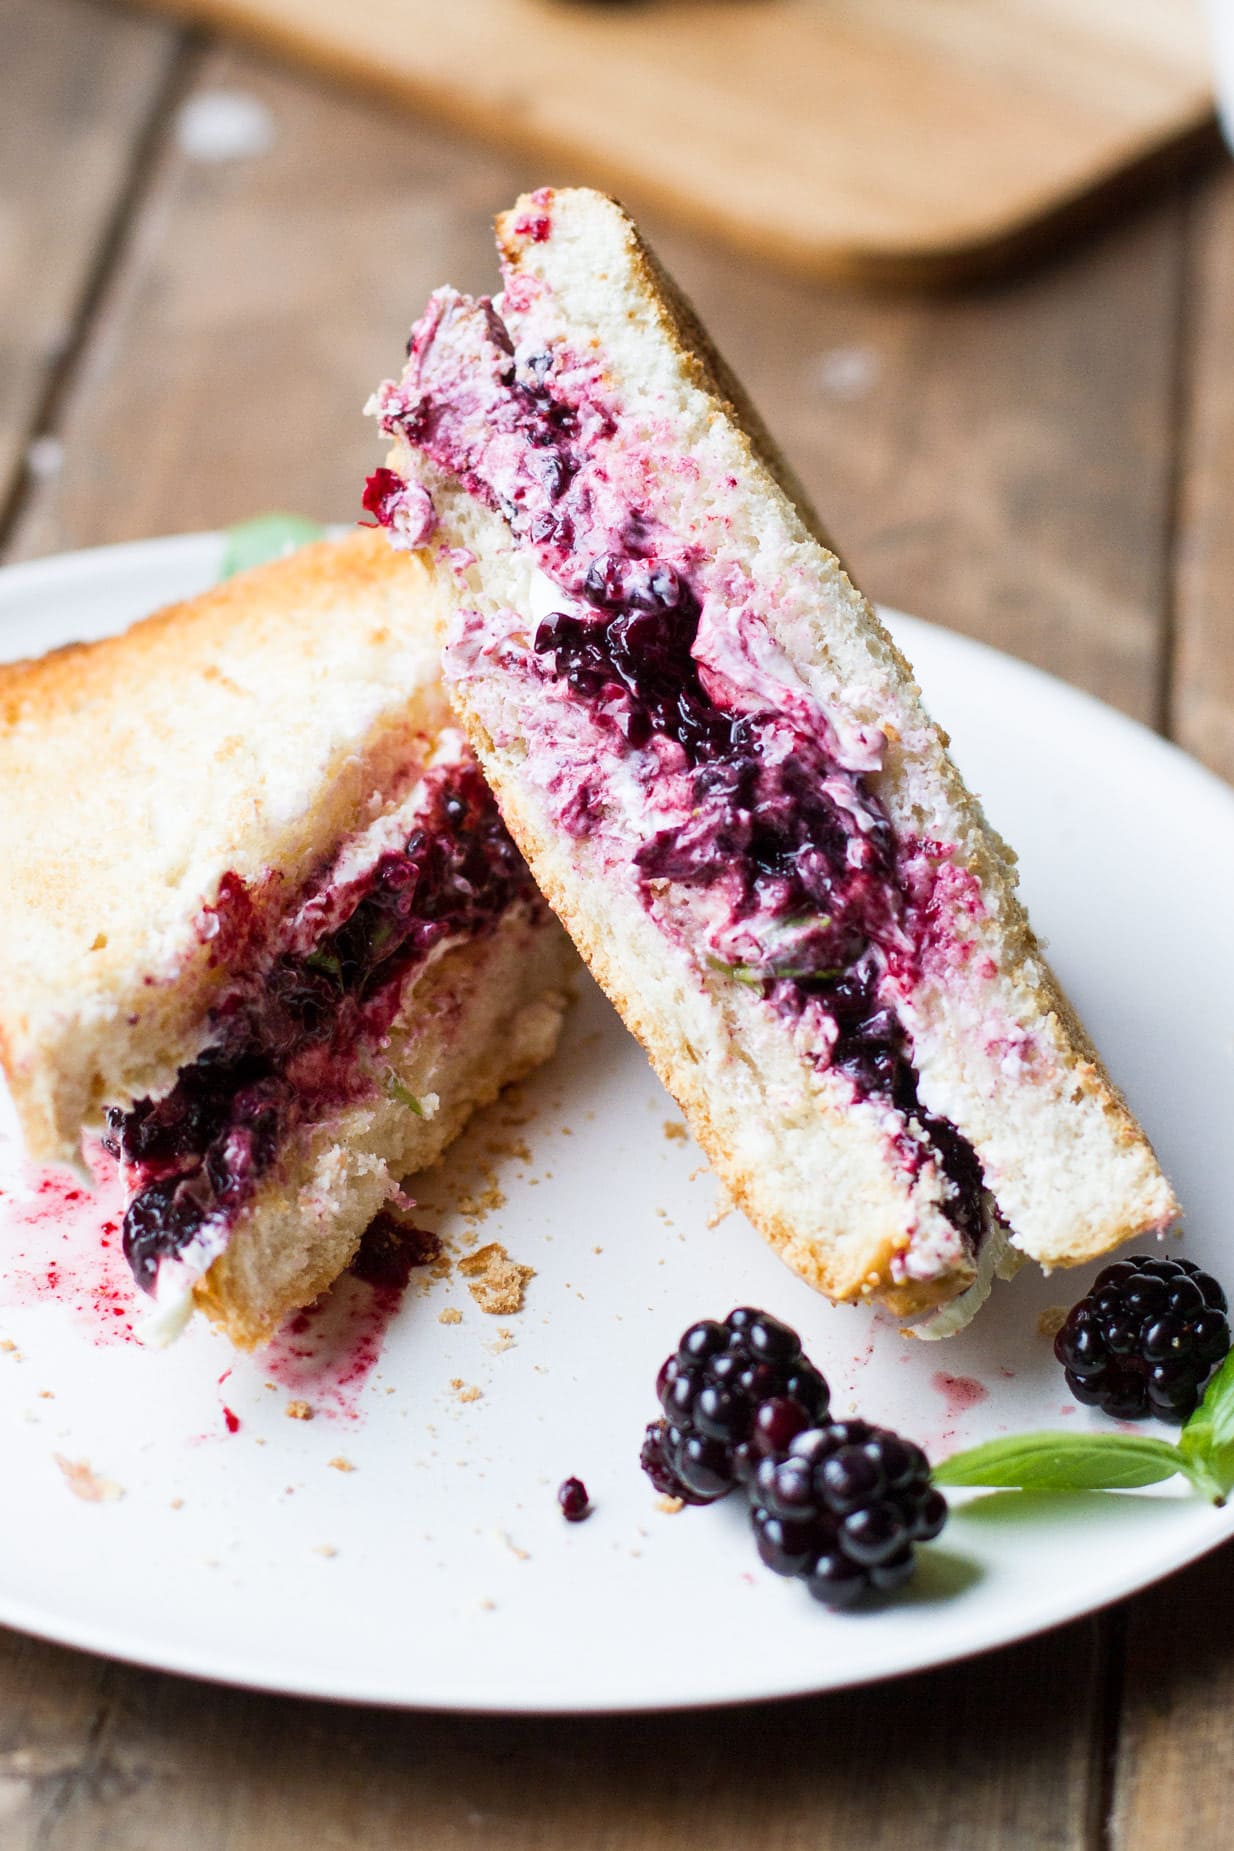 Balsamic Blackberry Basil Grilled Cheese